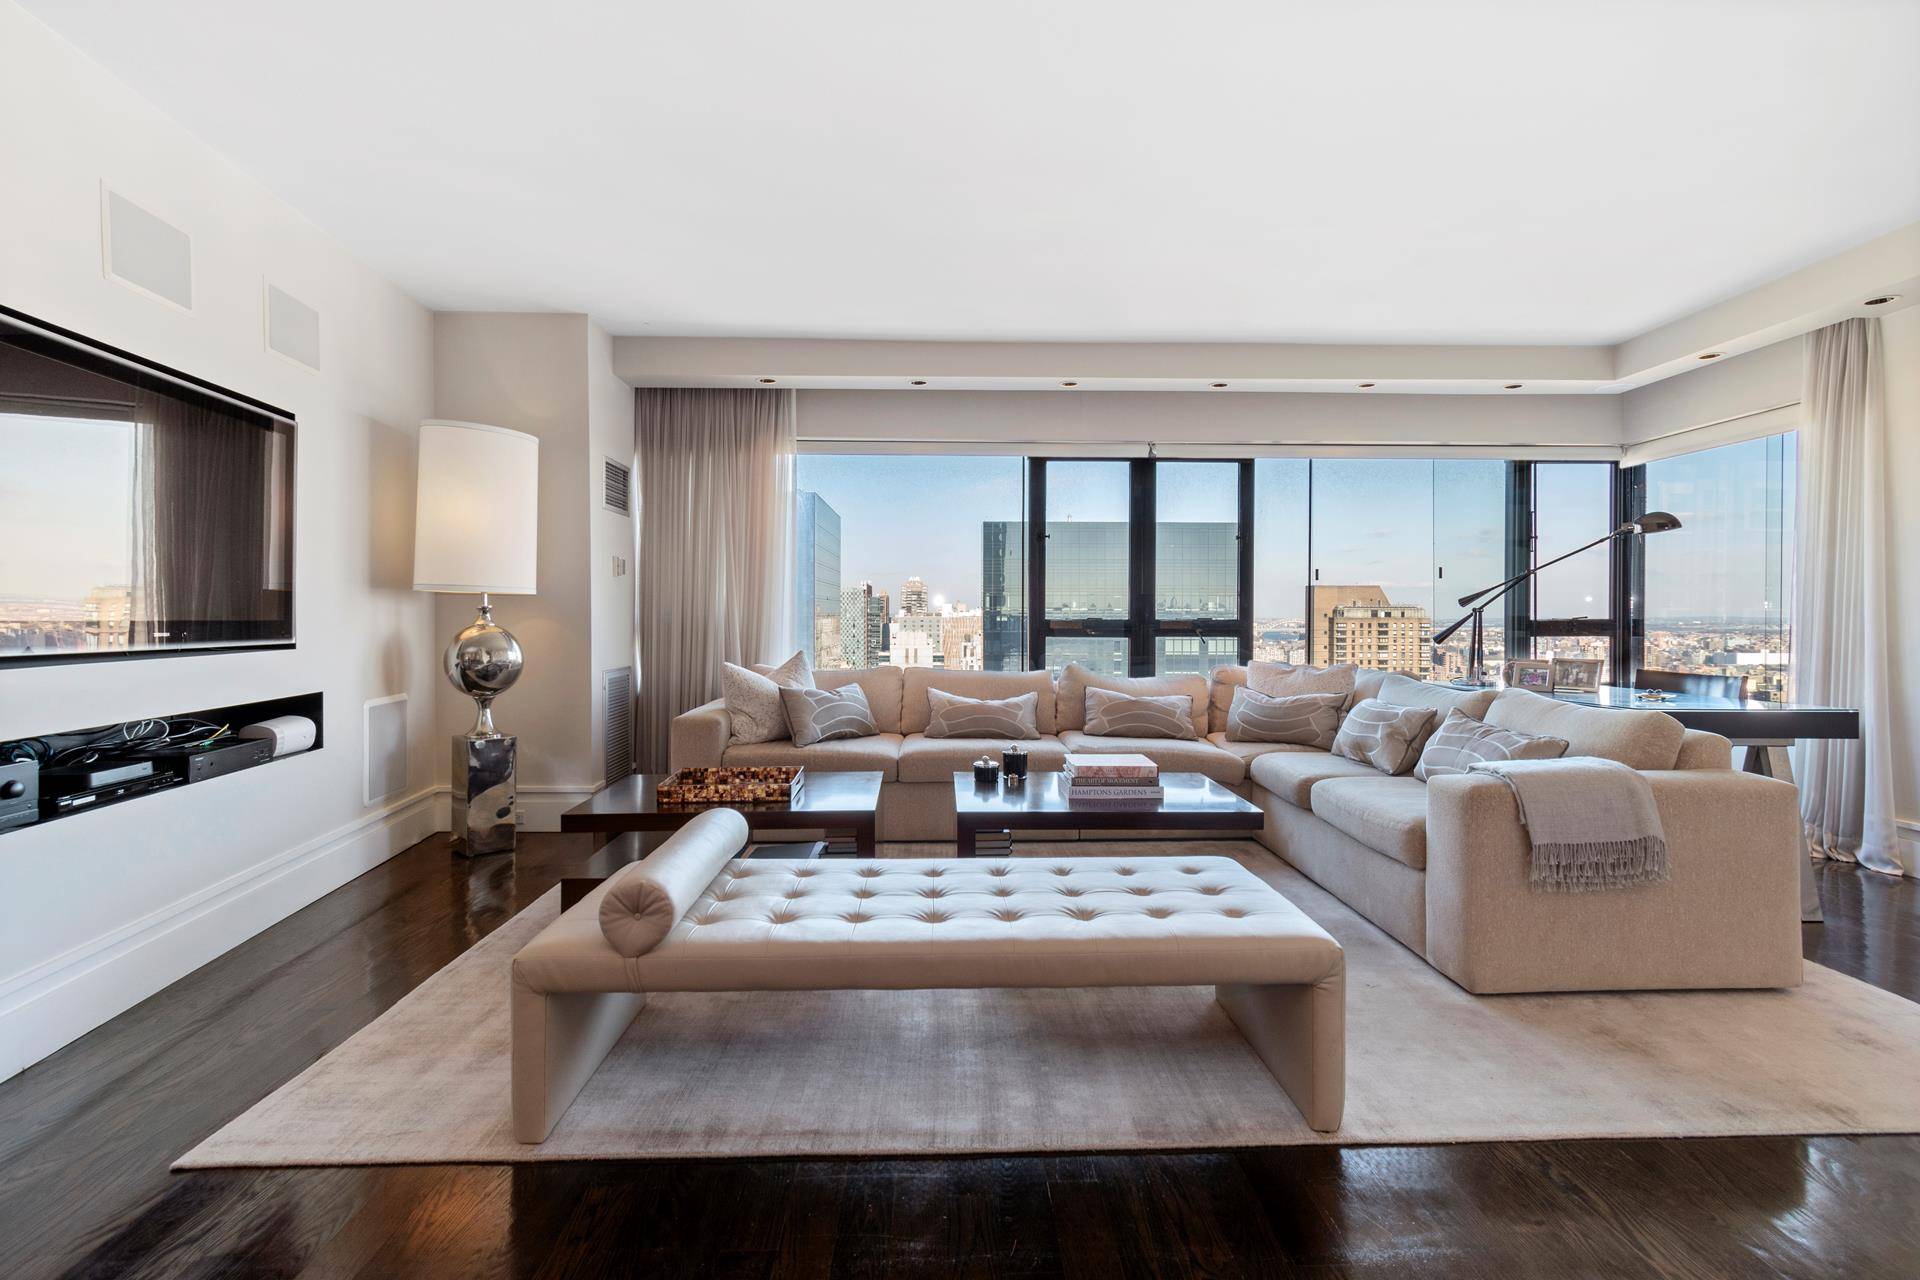 Perched on the 34th floor, enjoy spectacular views overlooking the east river, the iconic 59th st bridge and beyond !